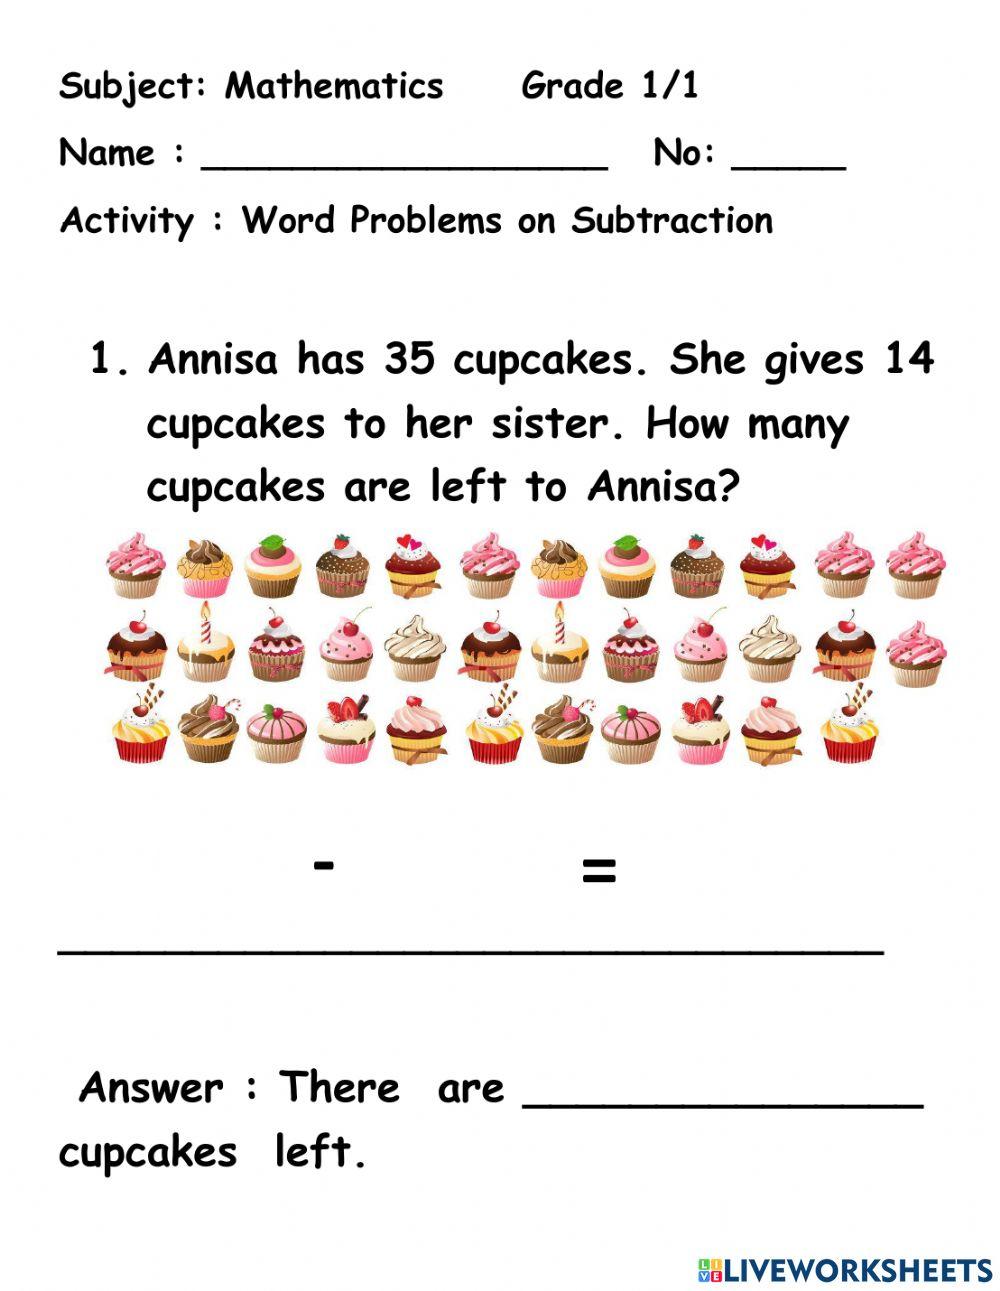 Word Problems on Subtraction